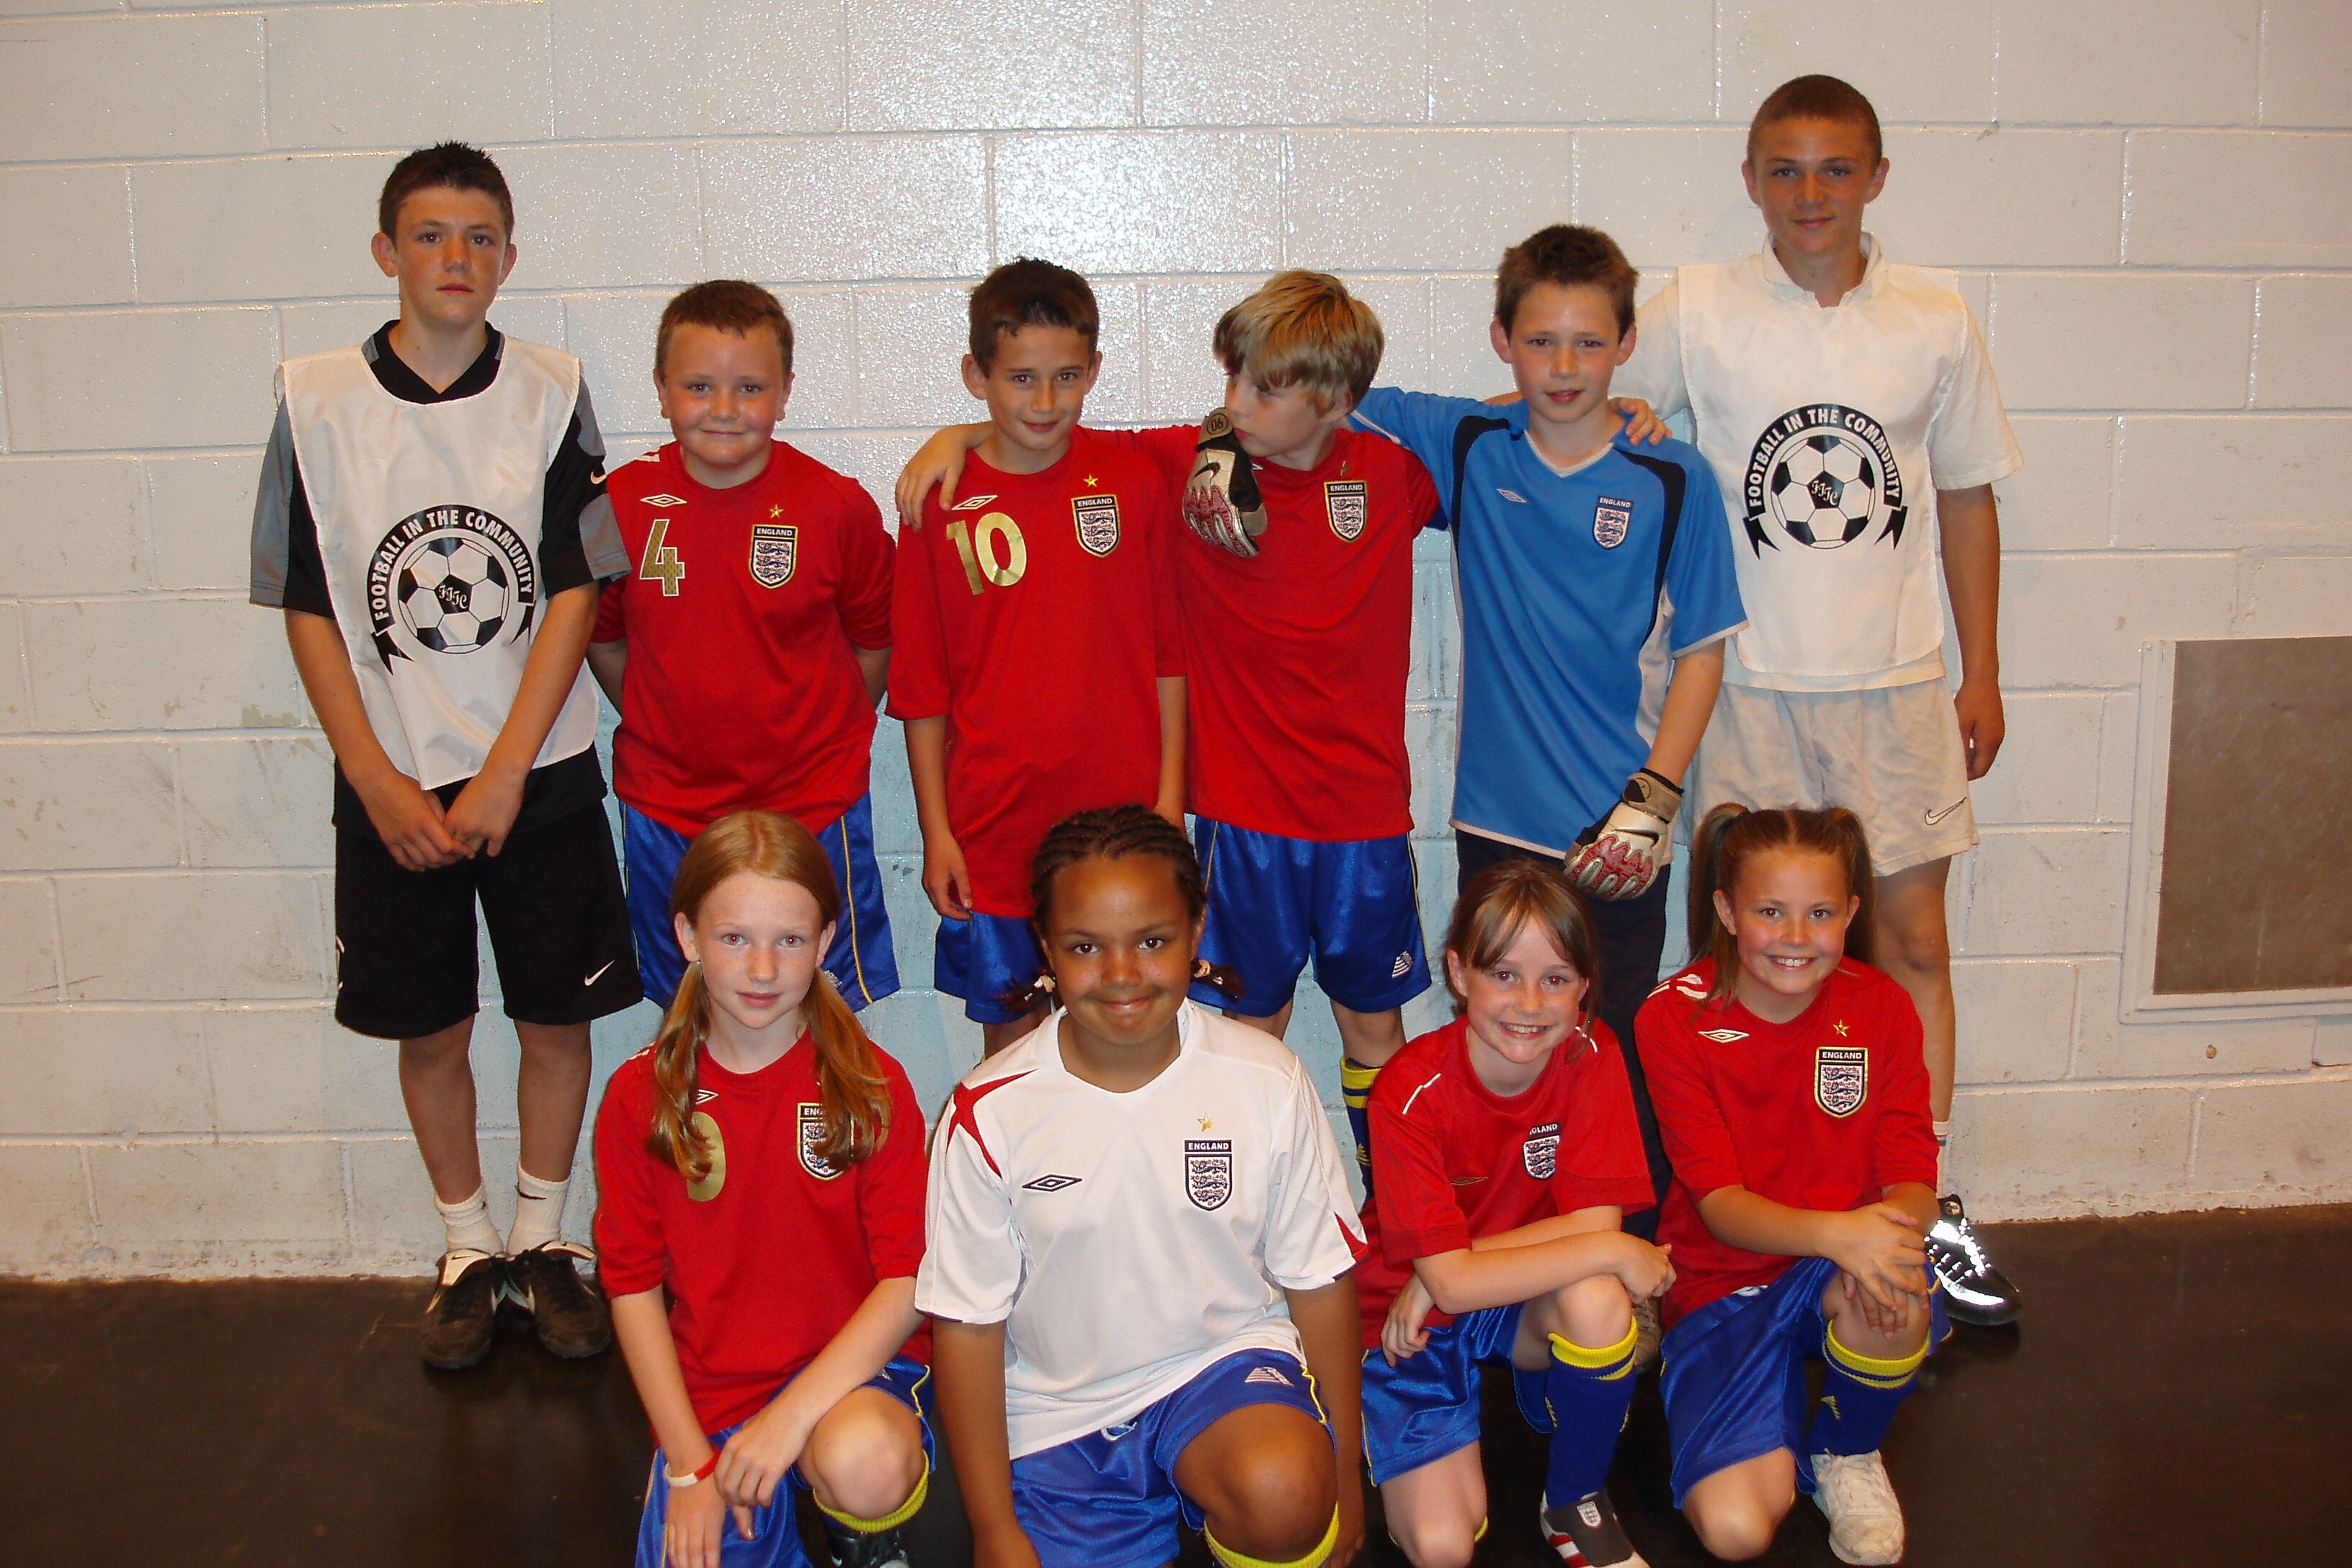 A 15-year-old Kieran Trippier with a team of primary school children he coached to victory in a mini-tournament